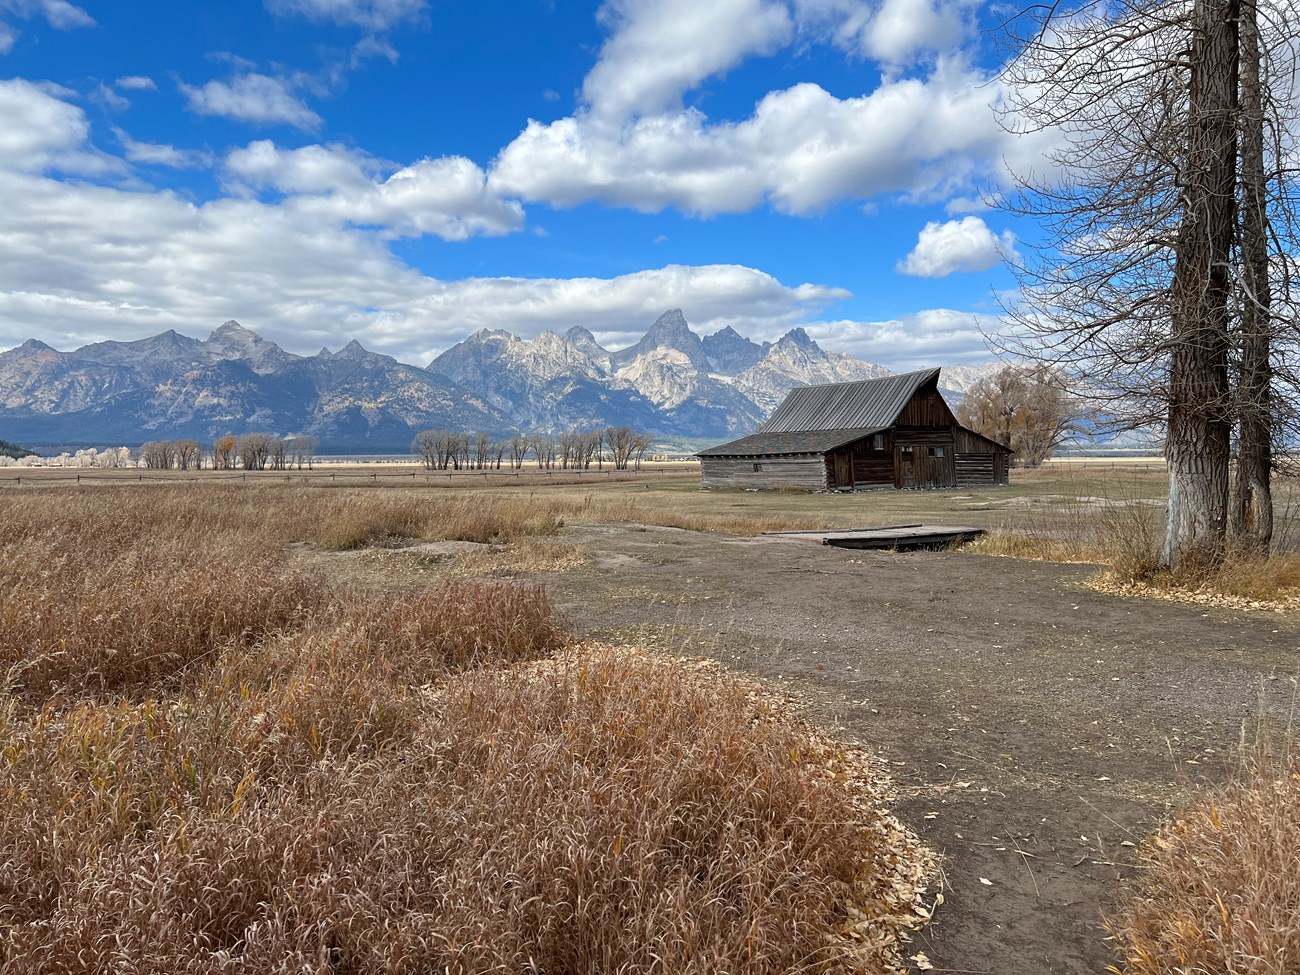 T.A. Moulton barn with Tetons in the background.